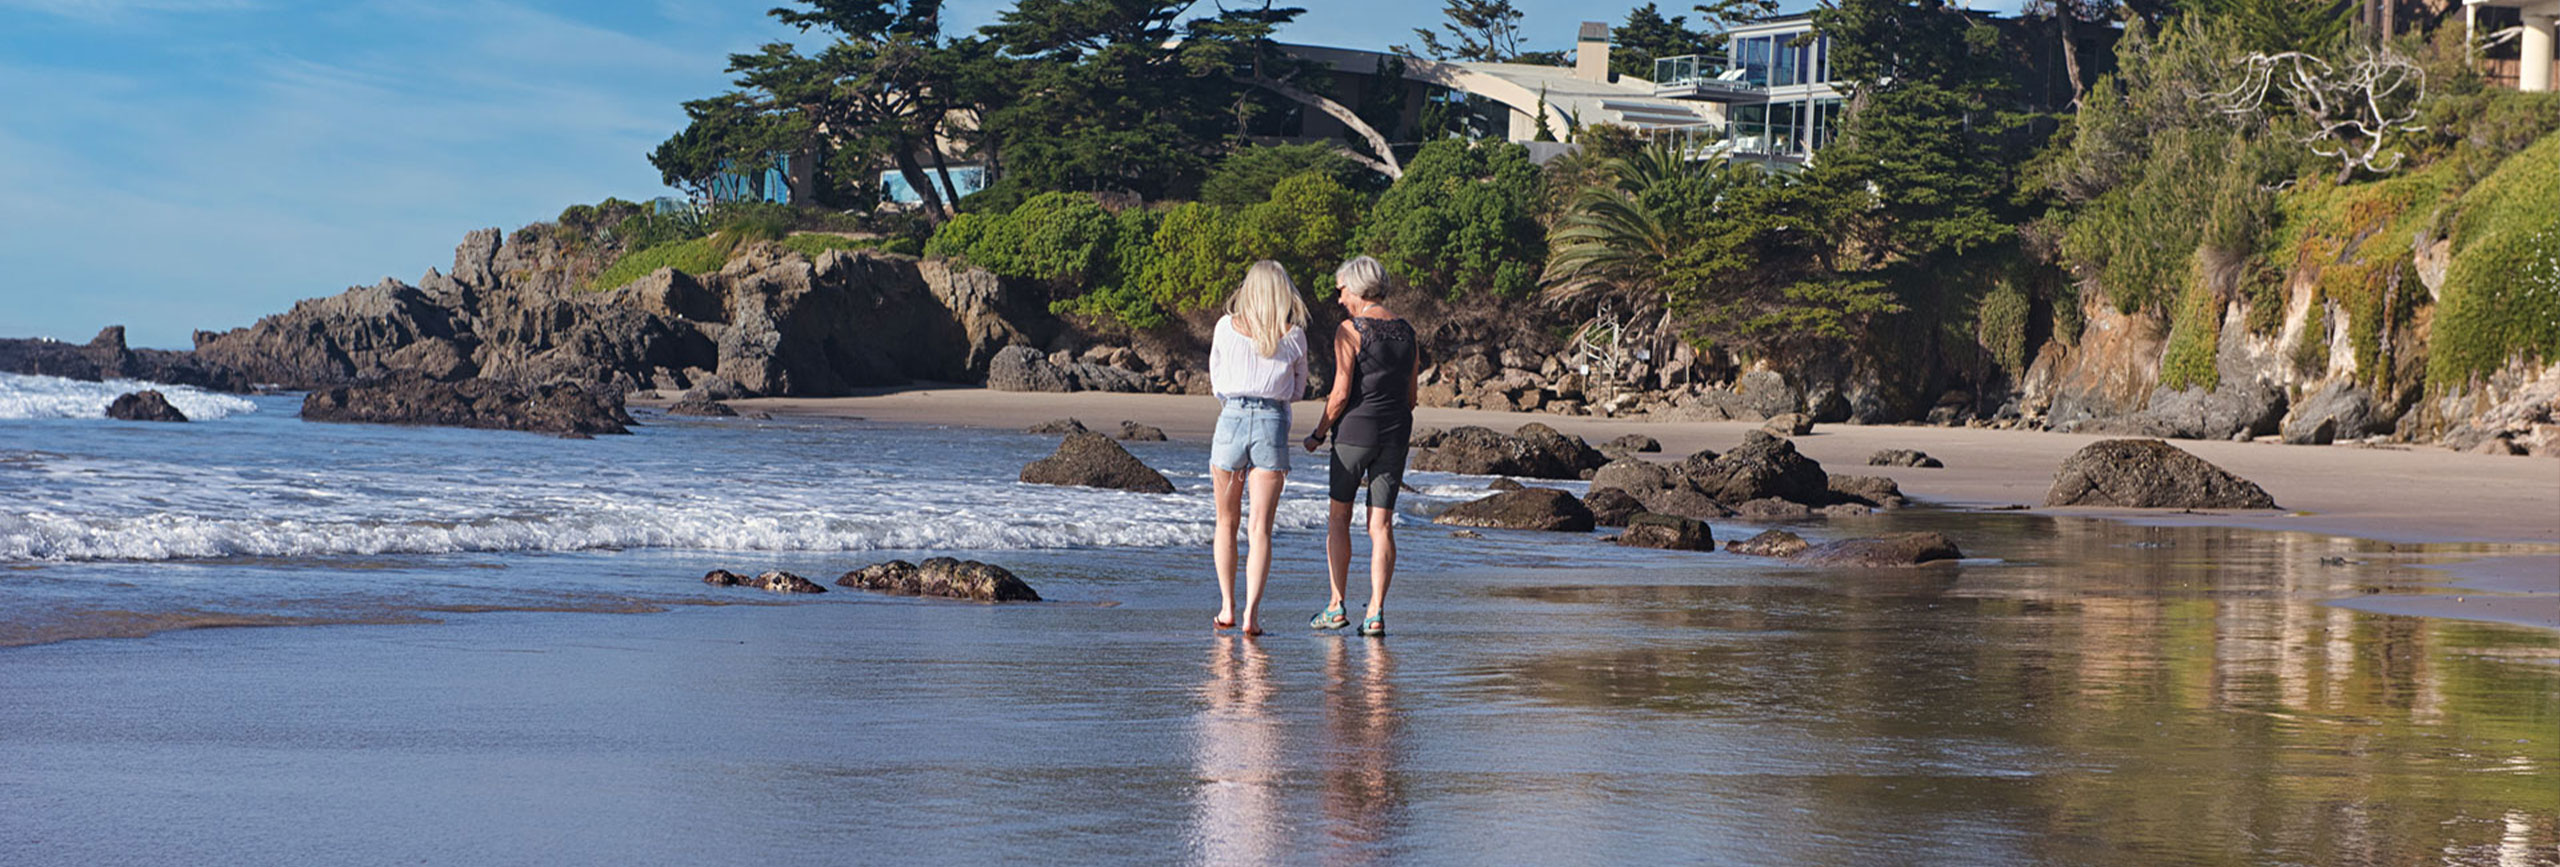 Rehab client and therapist walking the beach together in Malibu, California.